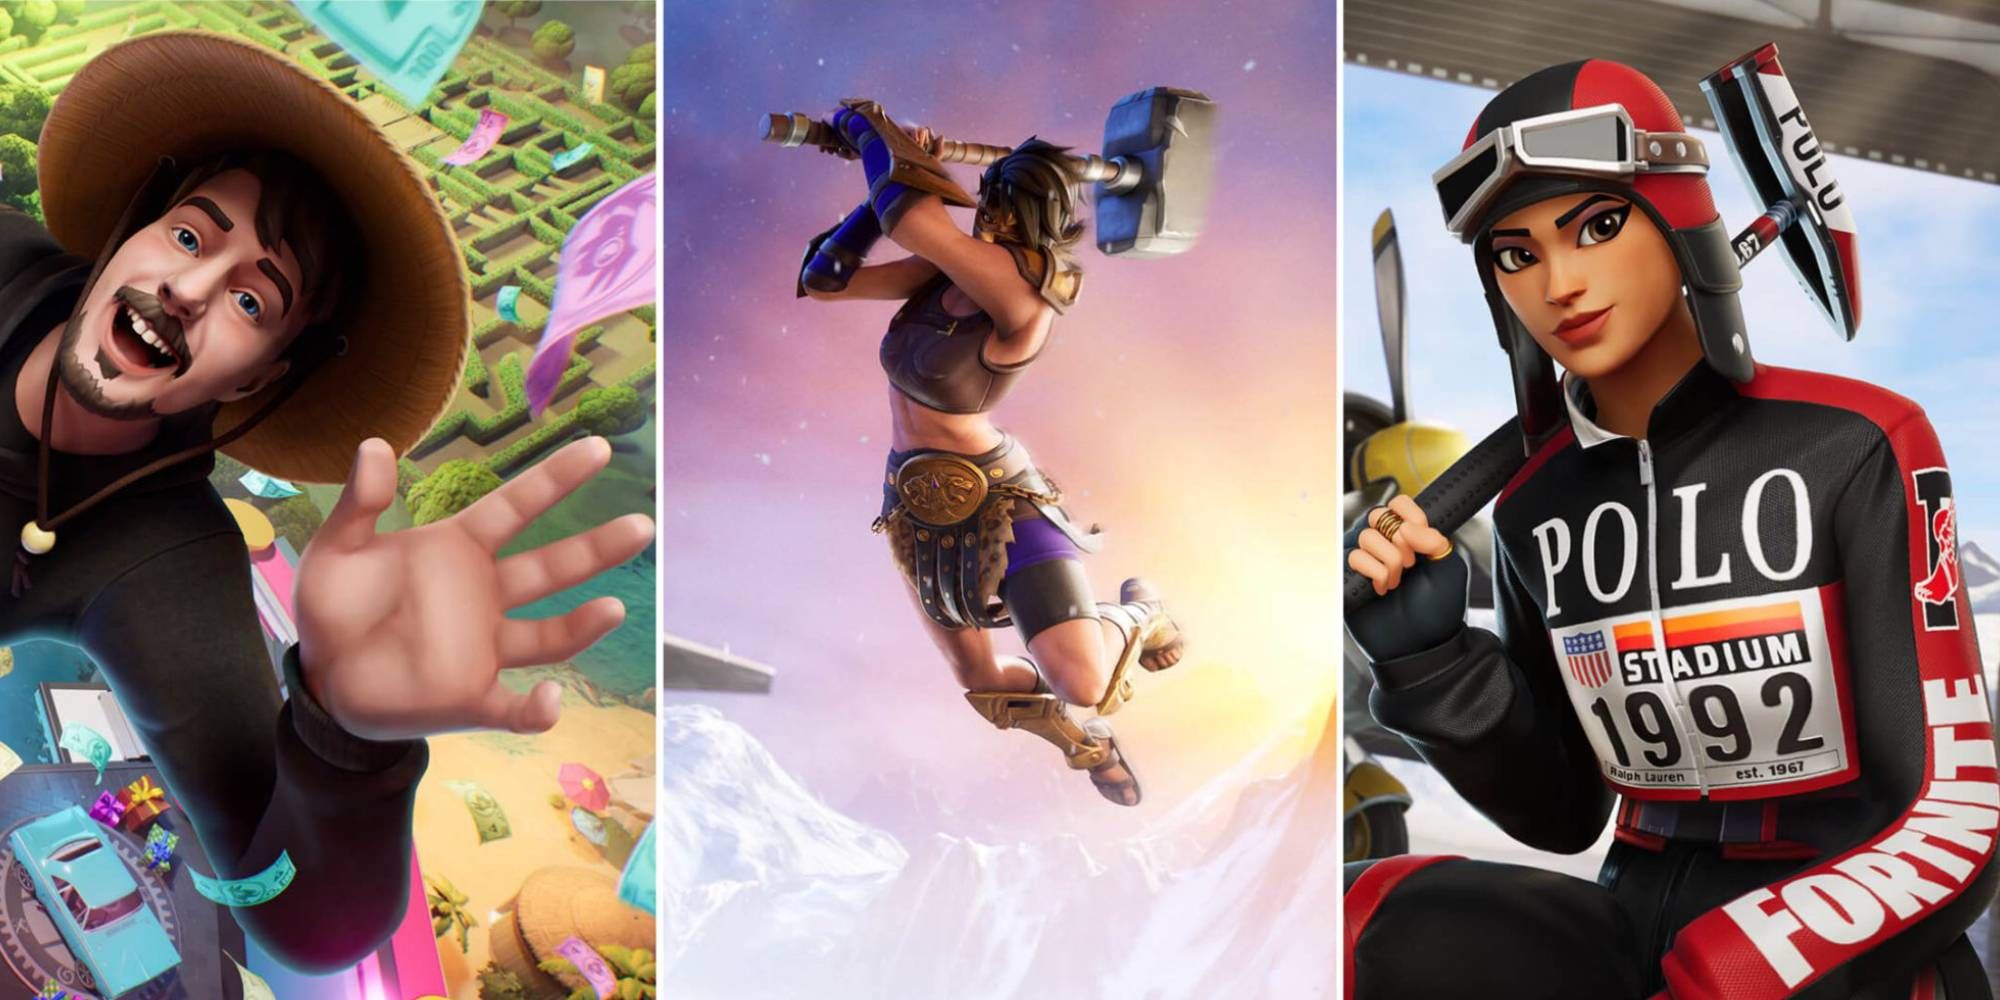 Relatable Things People Do In Fortnite Feature Image, showing different characters from the game.